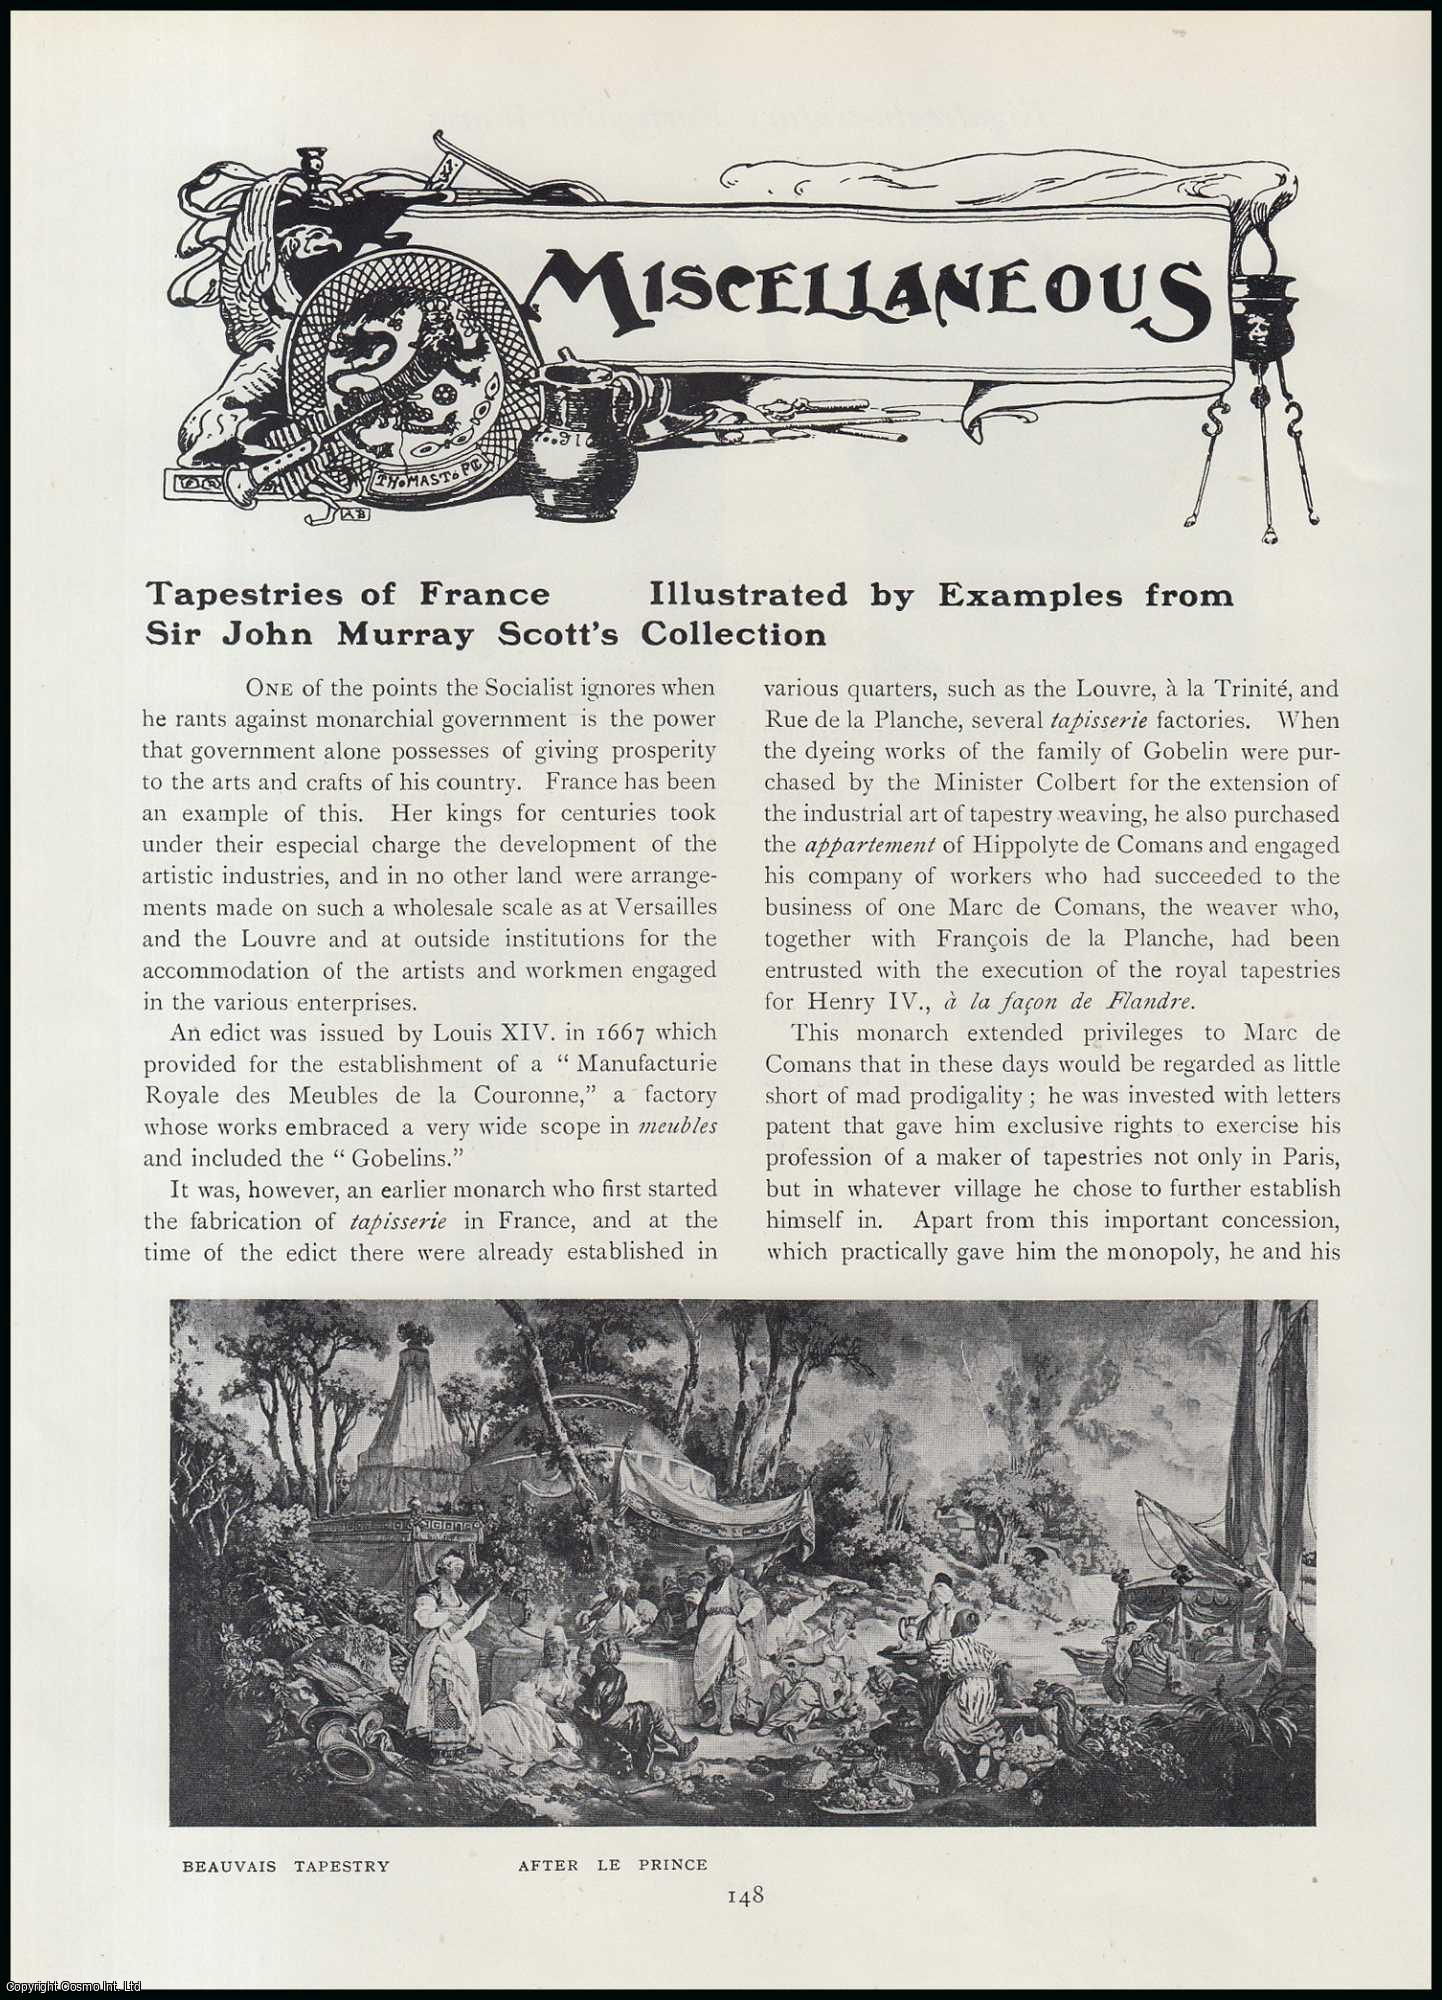 The Connoisseur - Tapestries of France : Illustrated by Examples From Sir John Murray Scott's Collection. An original article from The Connoisseur, 1911.